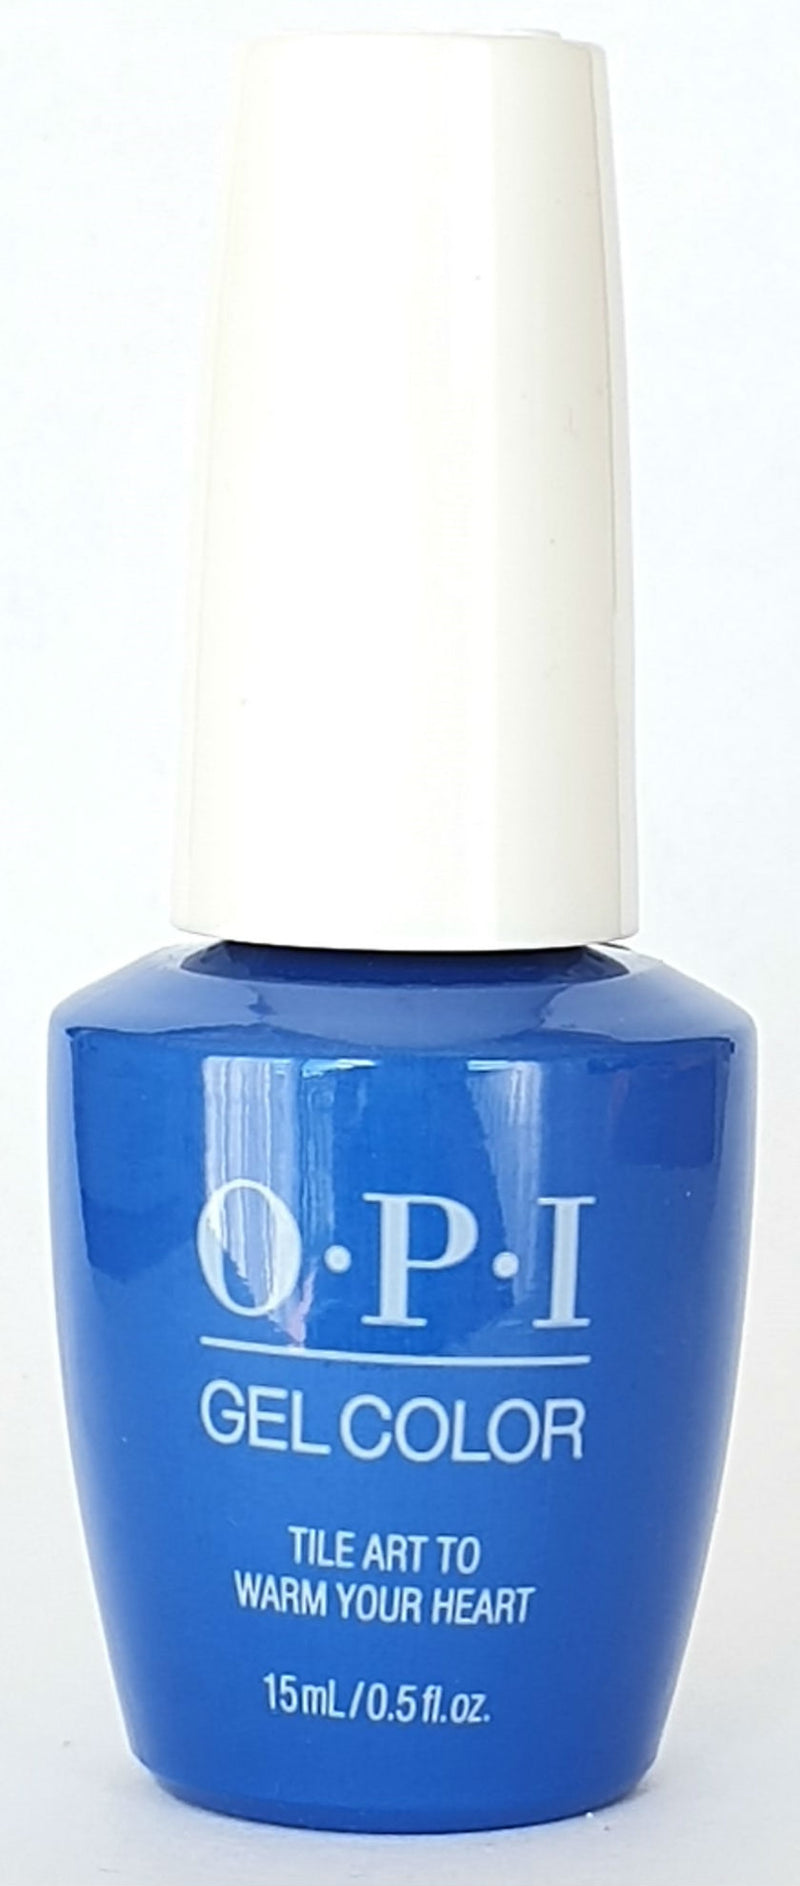 Tile Art to Warm Your Heart * OPI Gelcolor